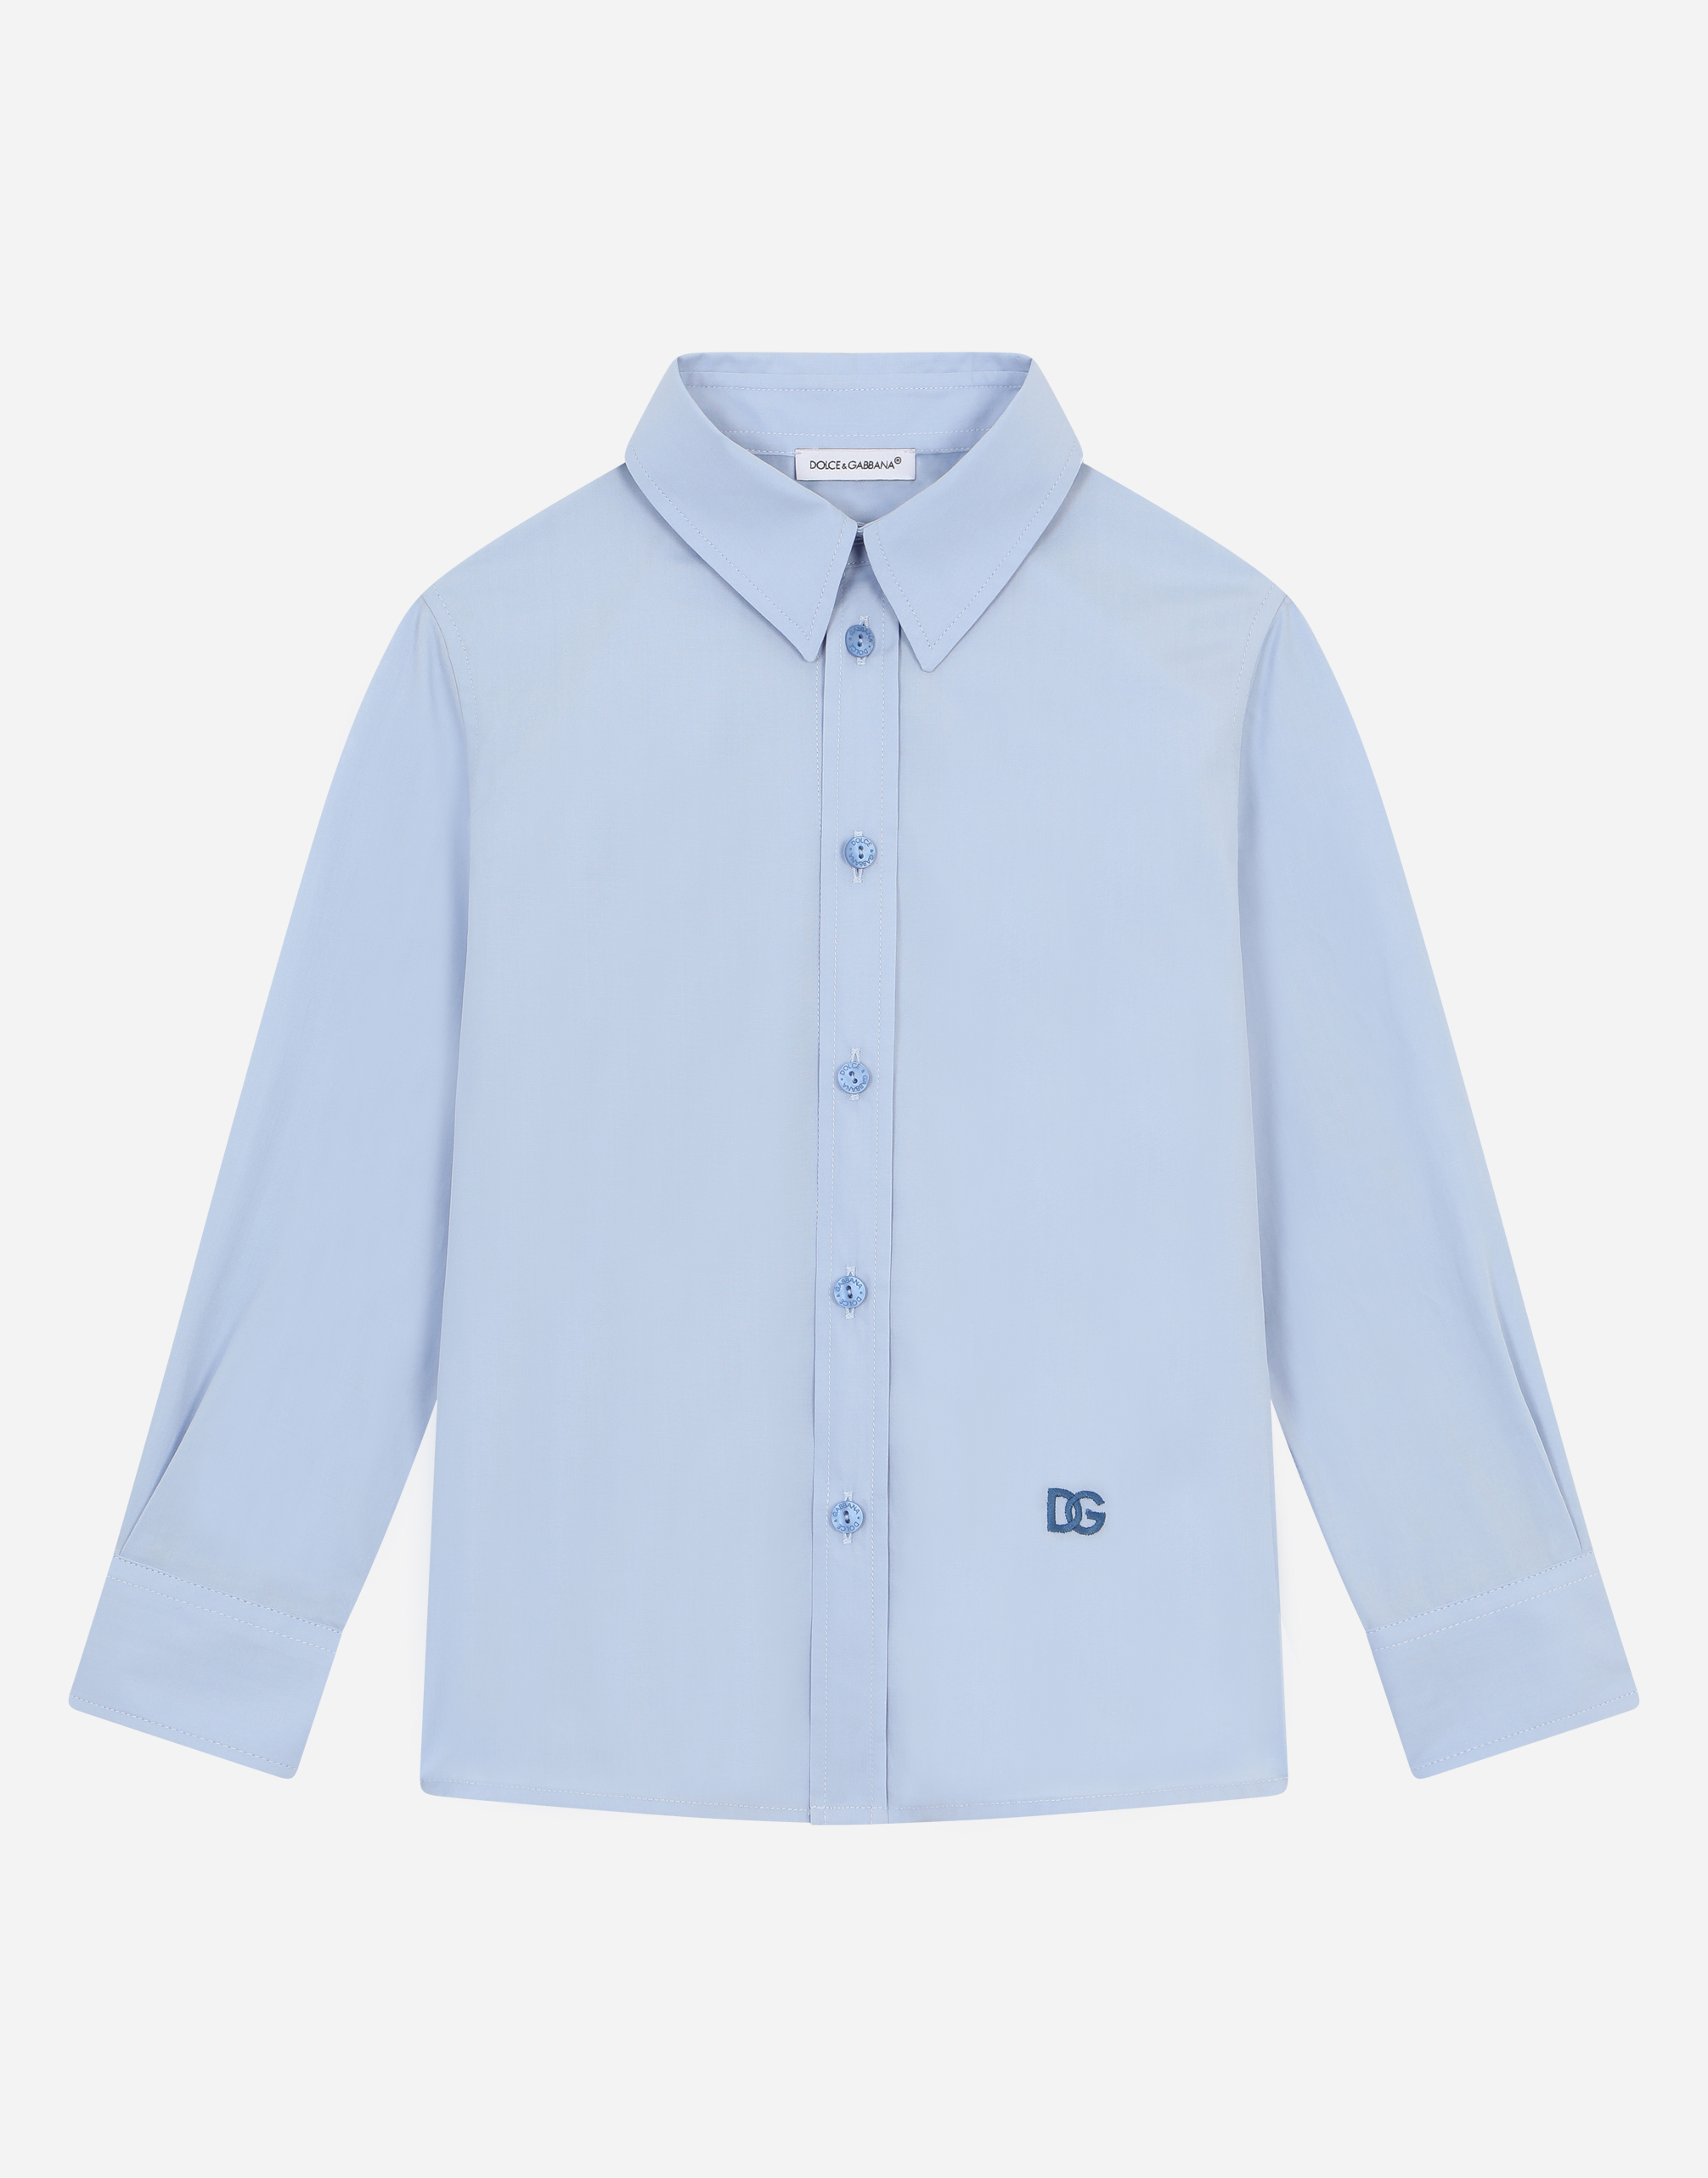 Poplin shirt with DG logo embroidery in Azure